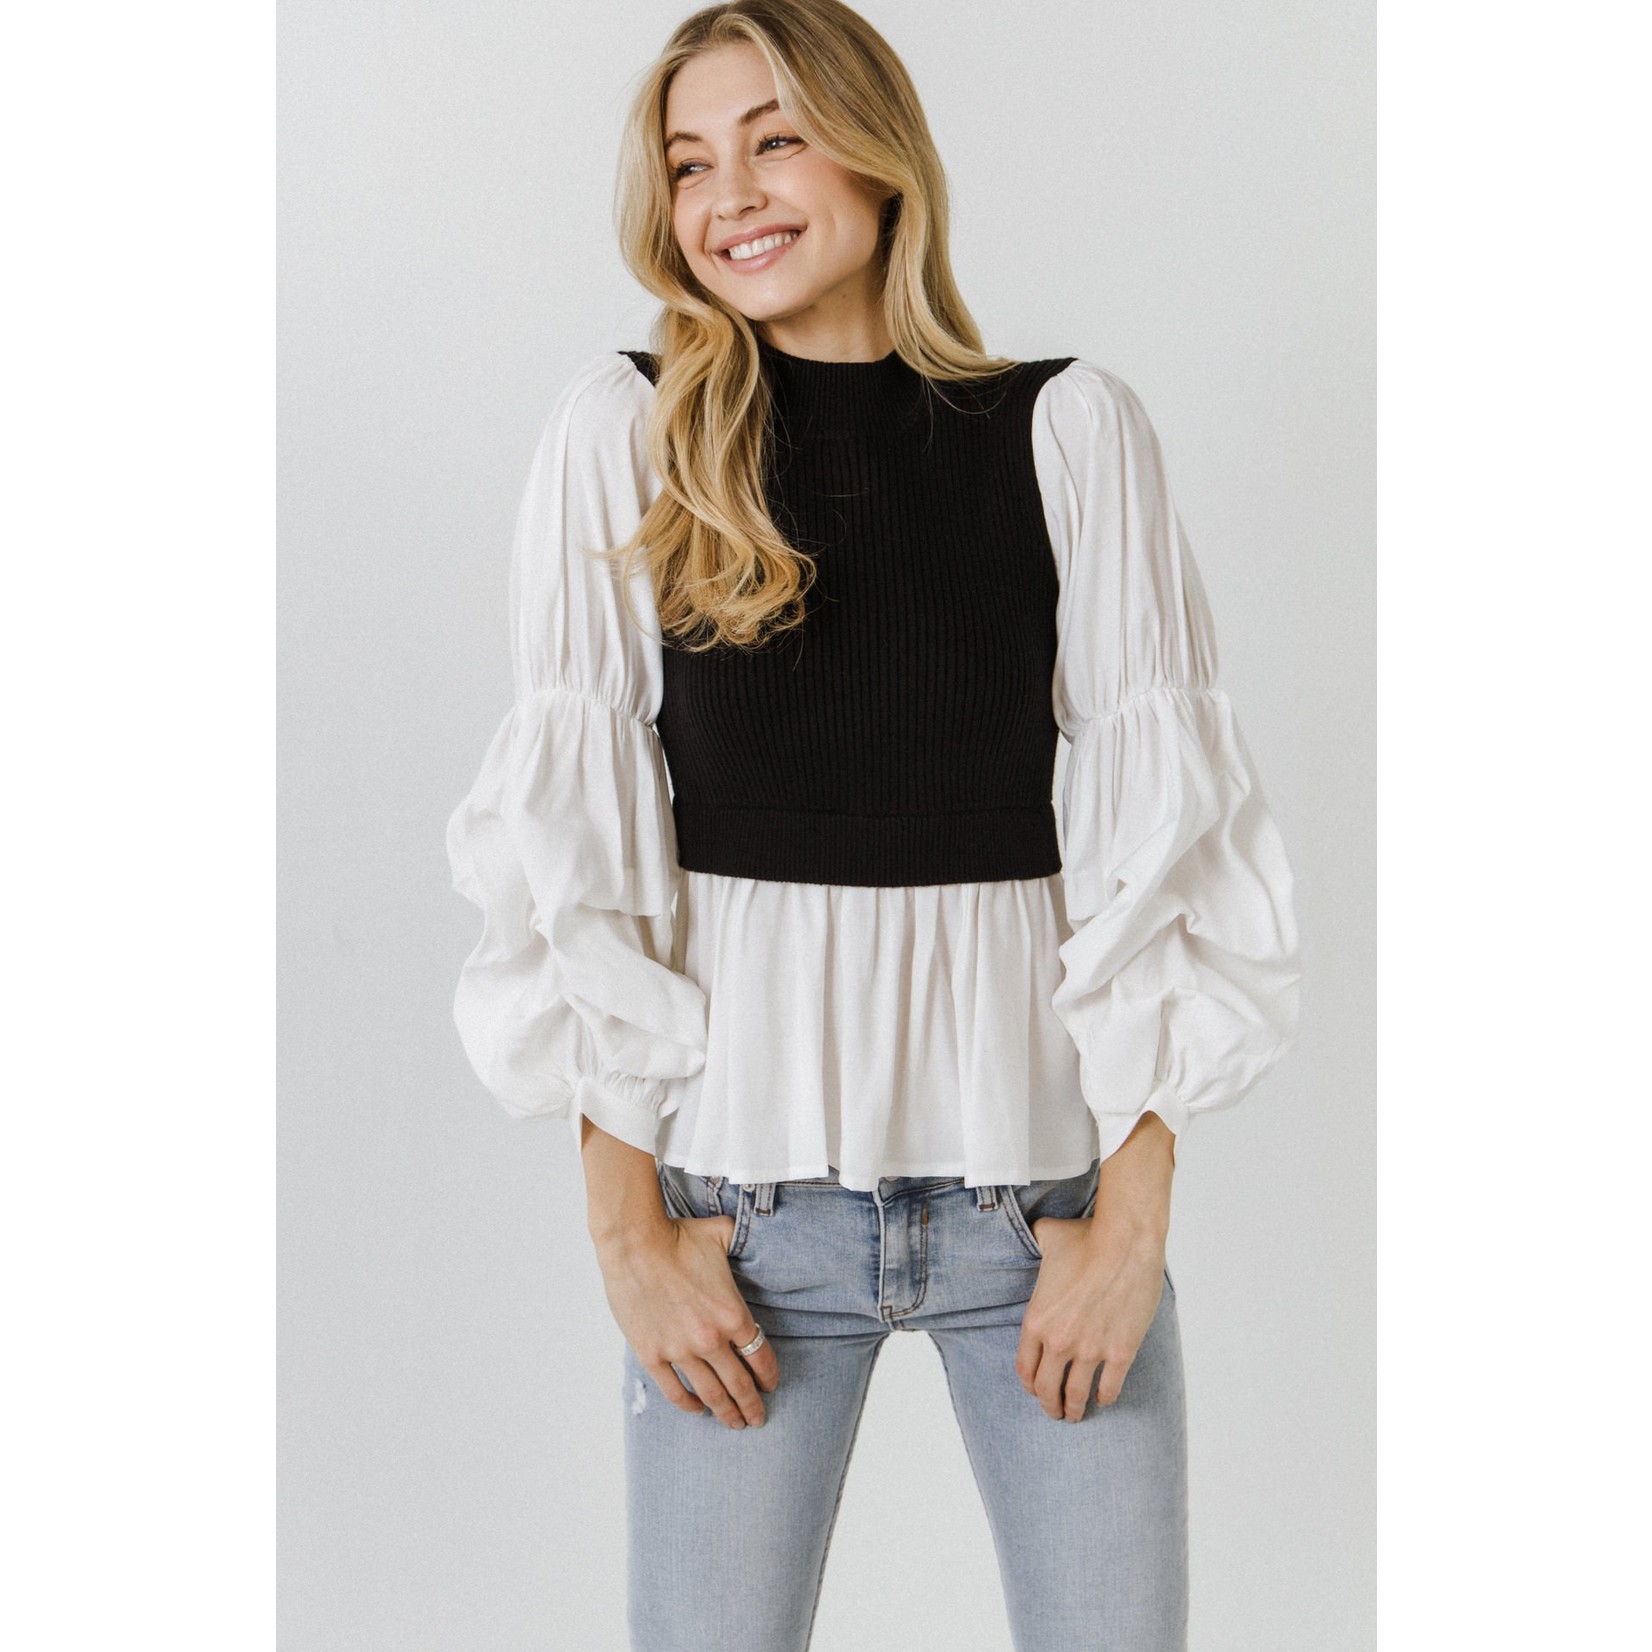 Knit/Woven Combo Top -